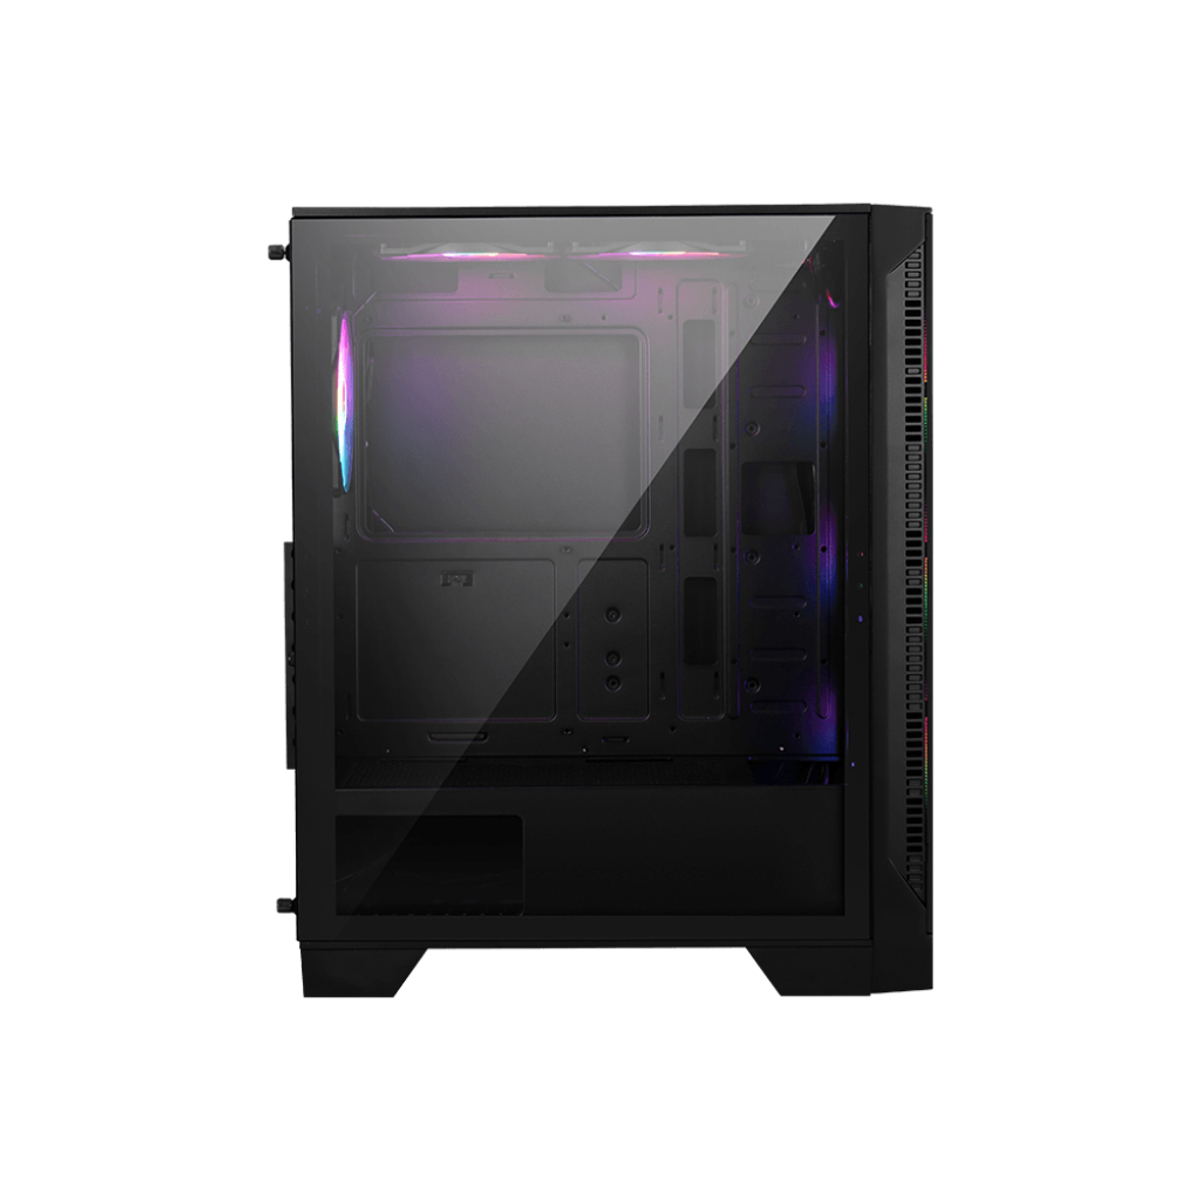 CASE MAG FORGE 120A AIRFLOW ATX